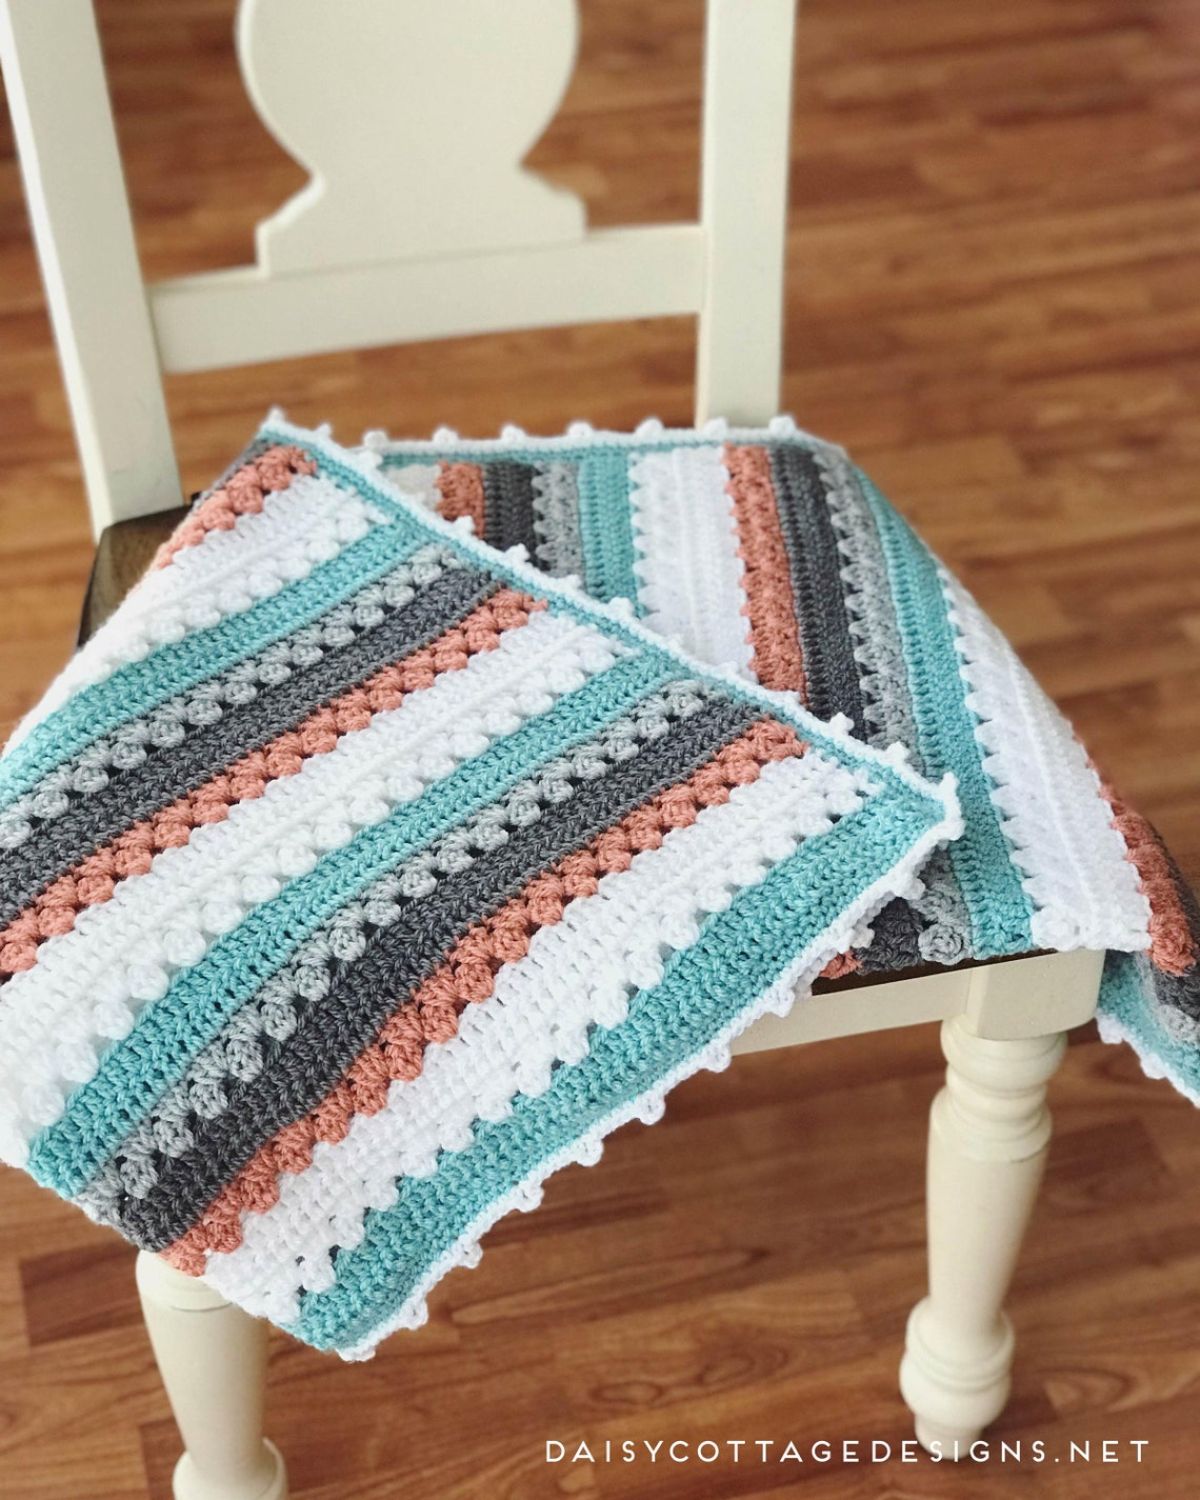 A small crochet blanket with blue, white, orange, navy, and pale gray horizontal stripes with a small white trim on all sides, placed on a cream chair.